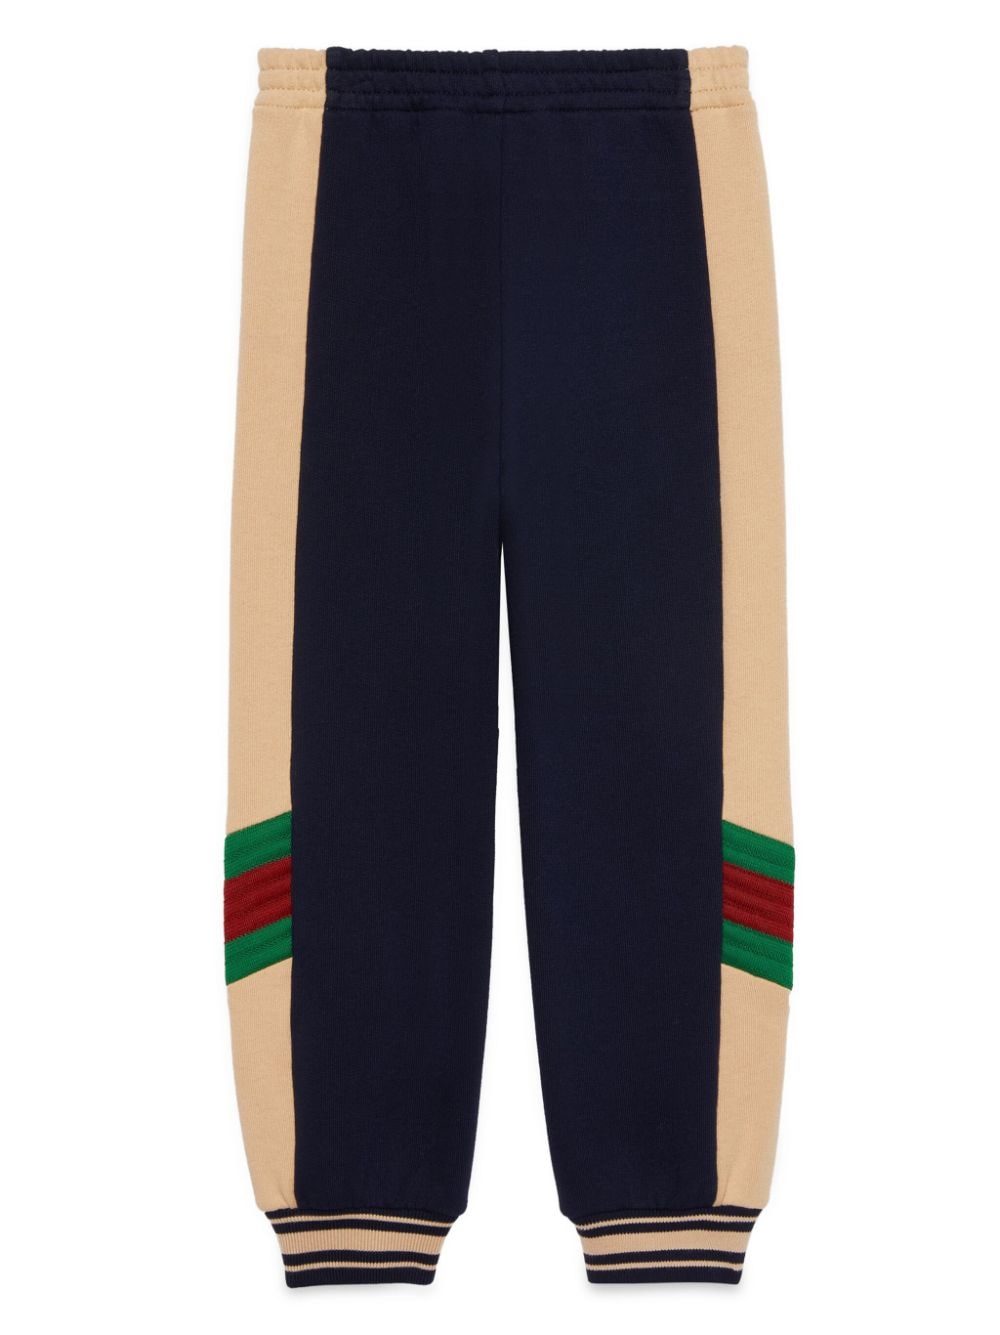 Blue and pink sports trousers for children